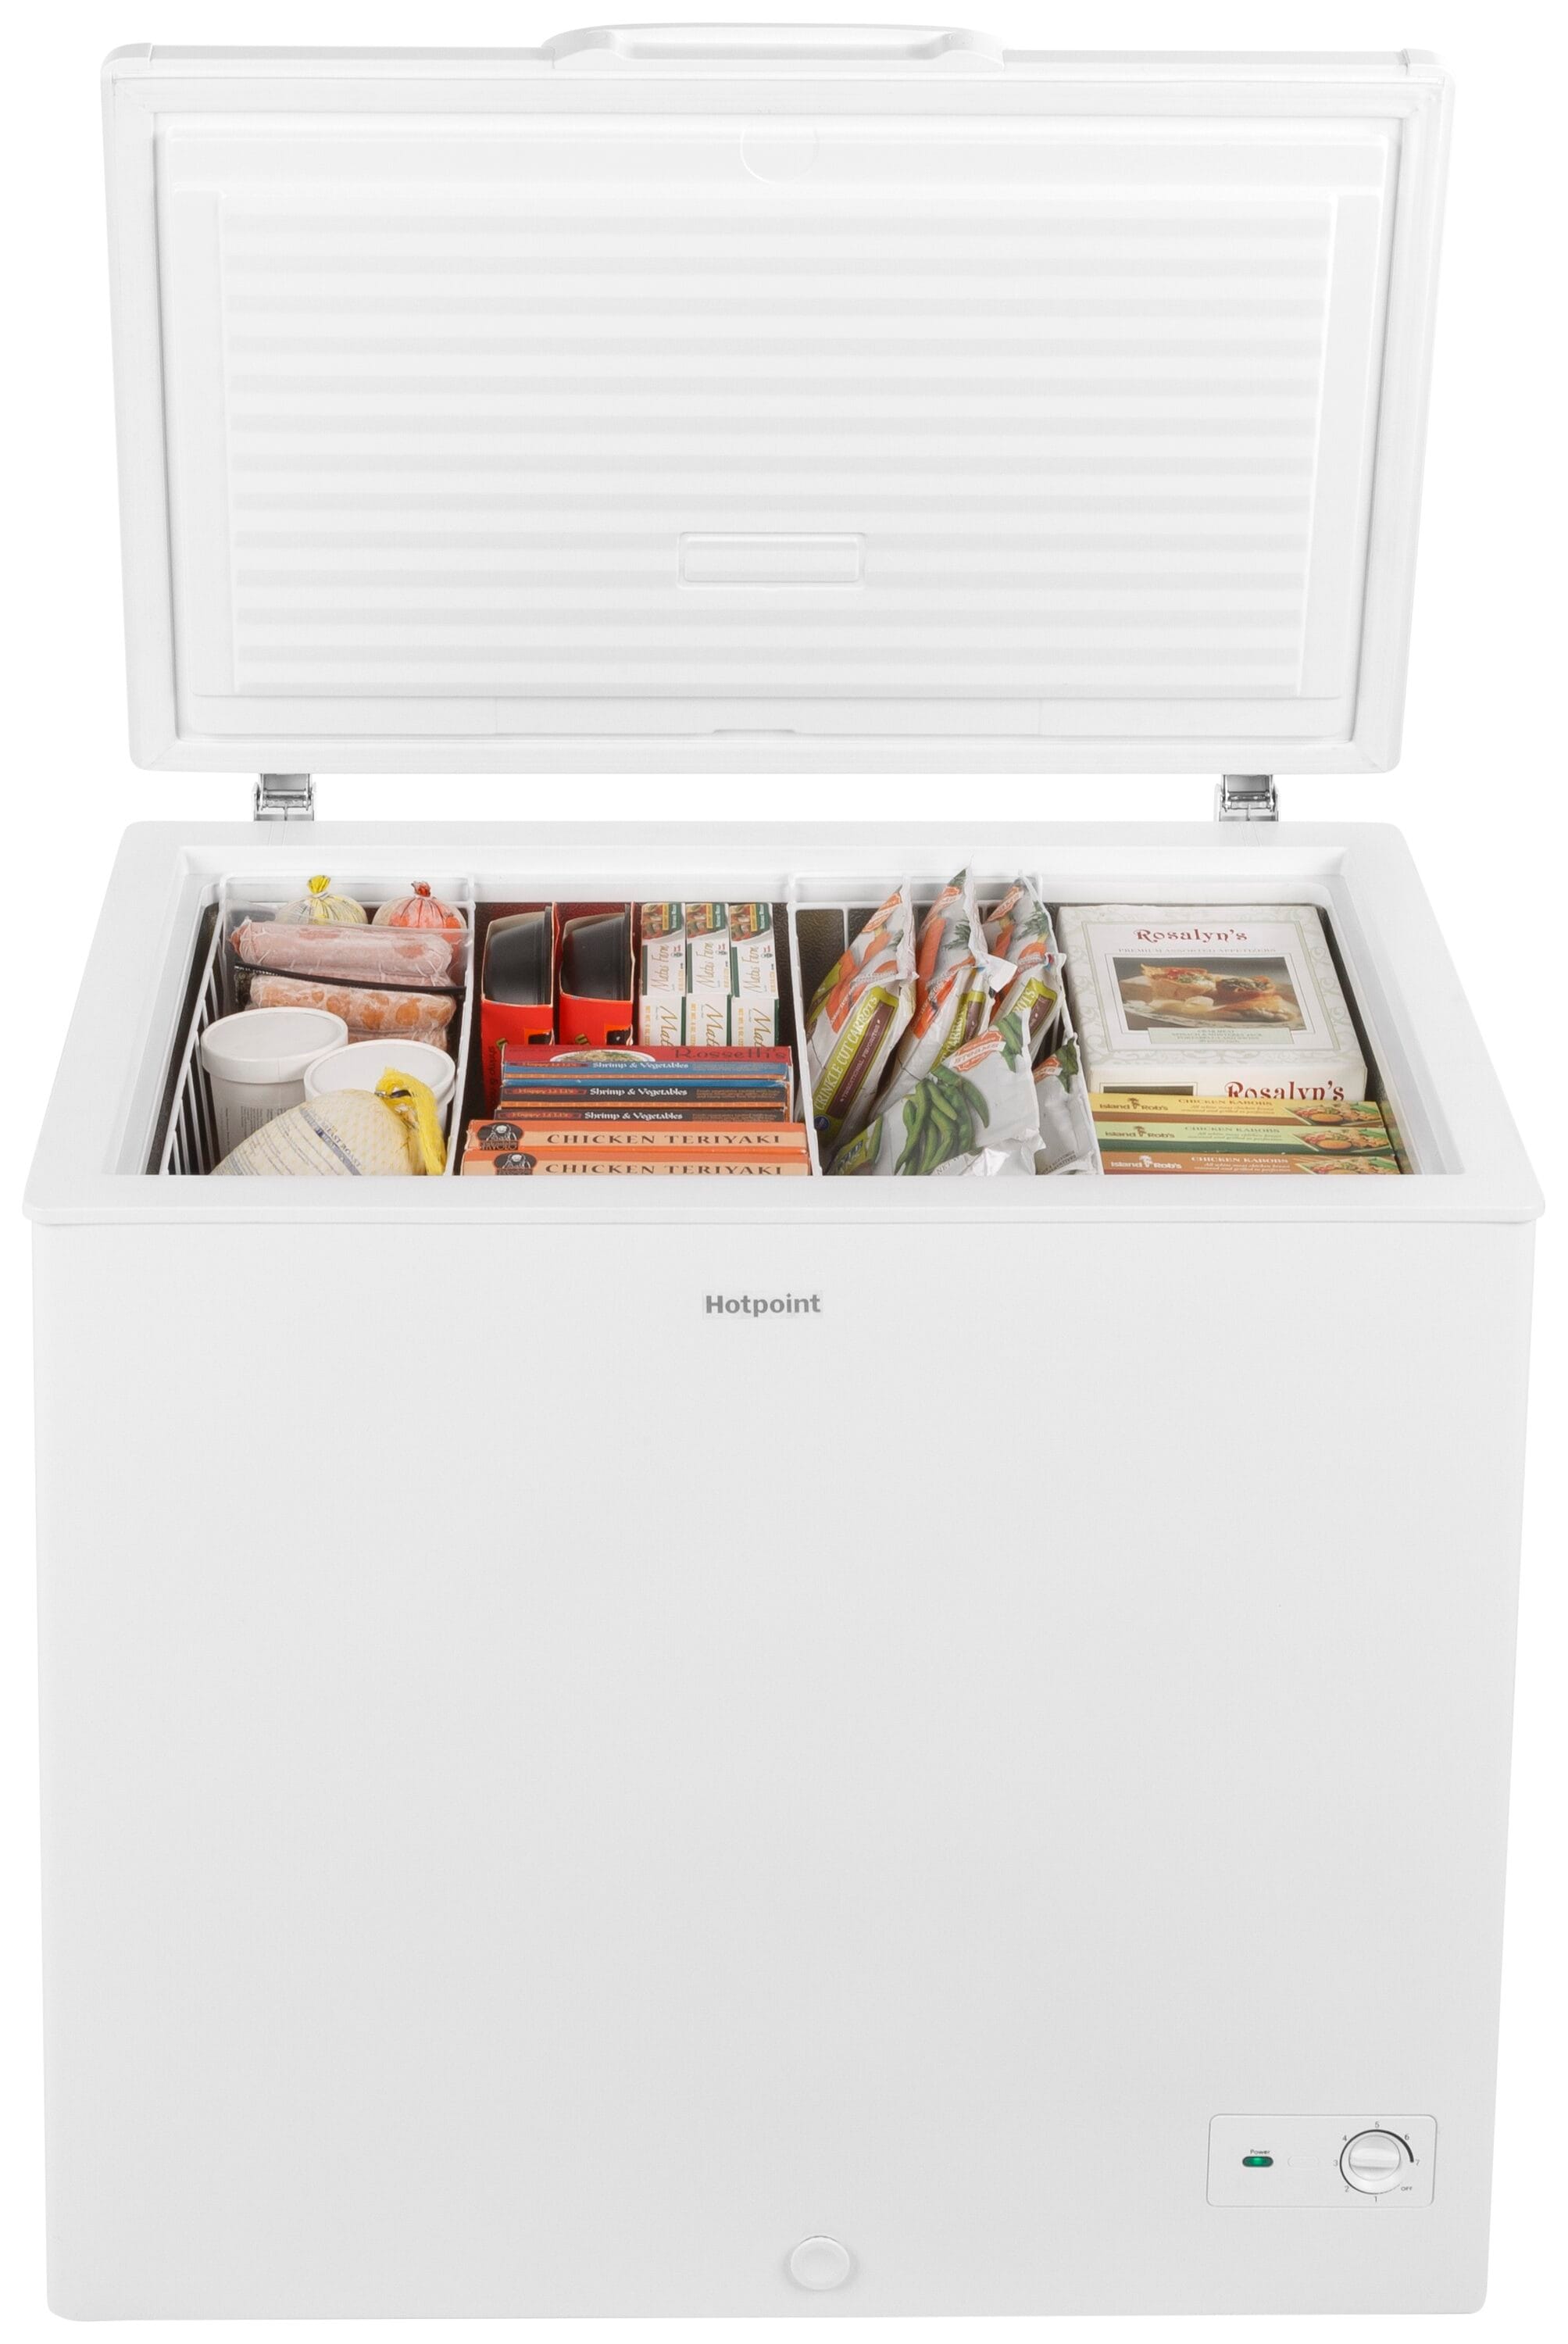 Best 5 Cubic Foot Ge Chest Freezer - In Modesto for sale in Turlock,  California for 2024